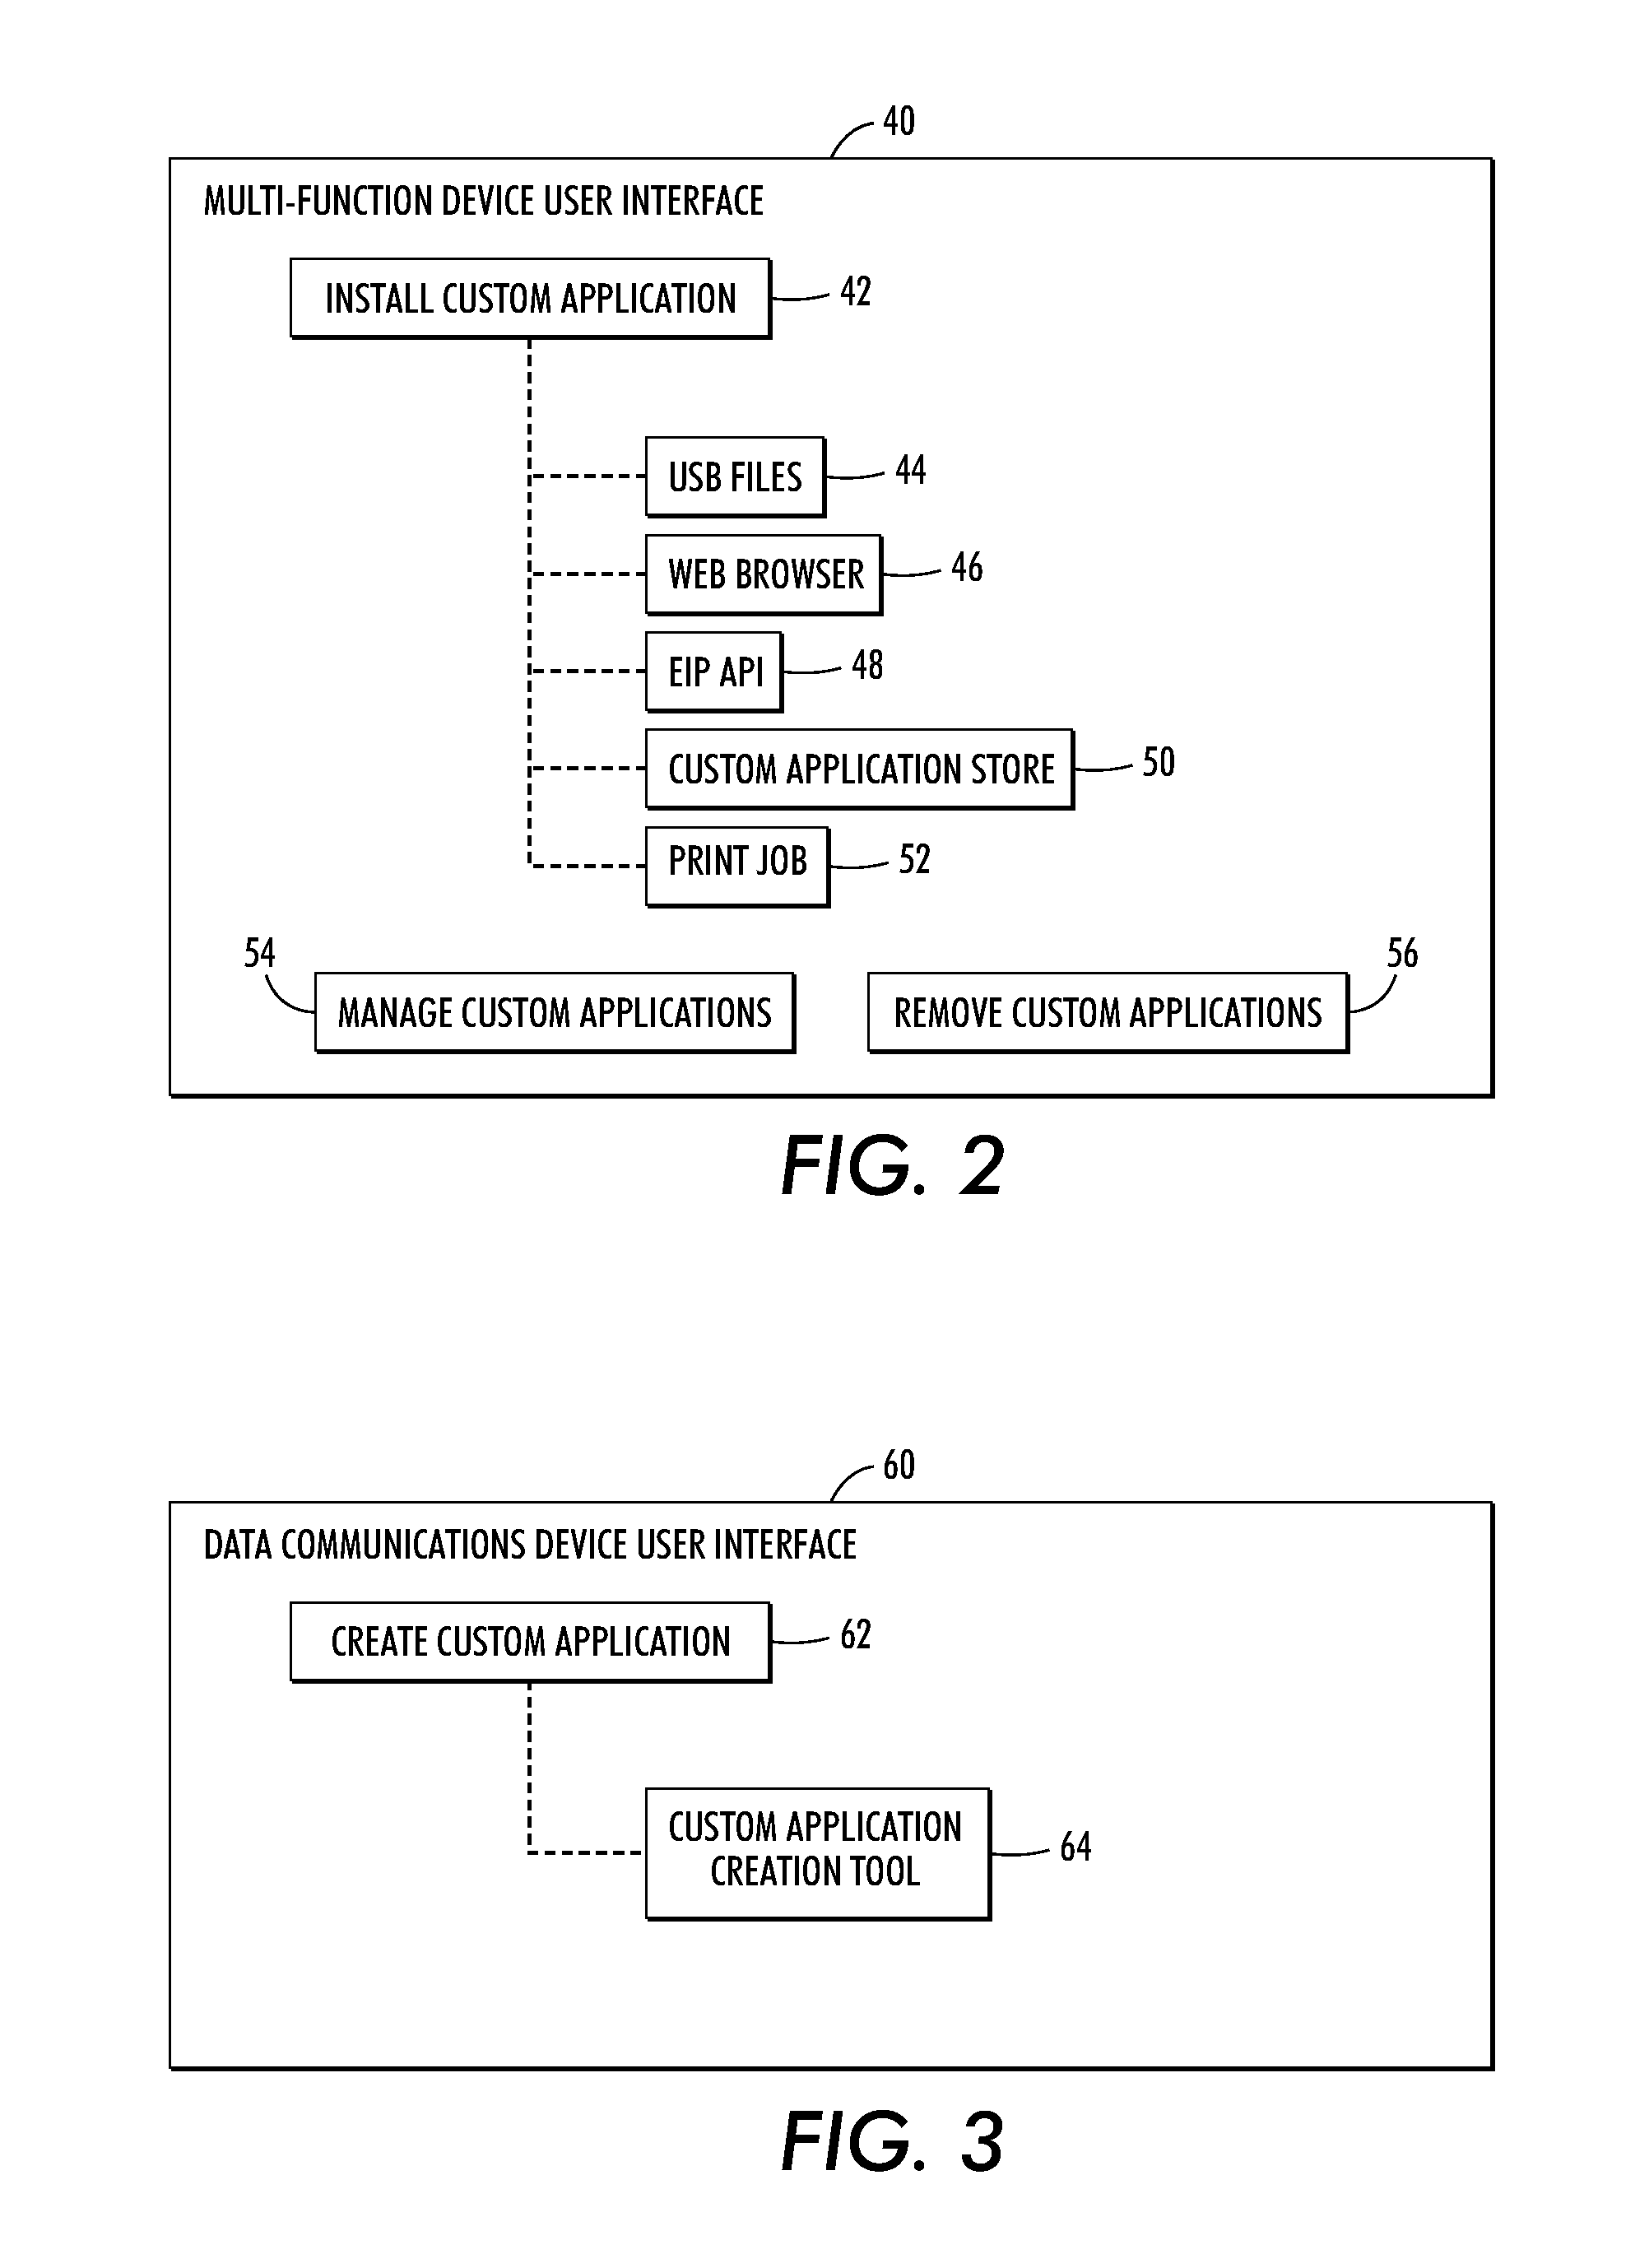 Tools and methods for customizing multi-function devices